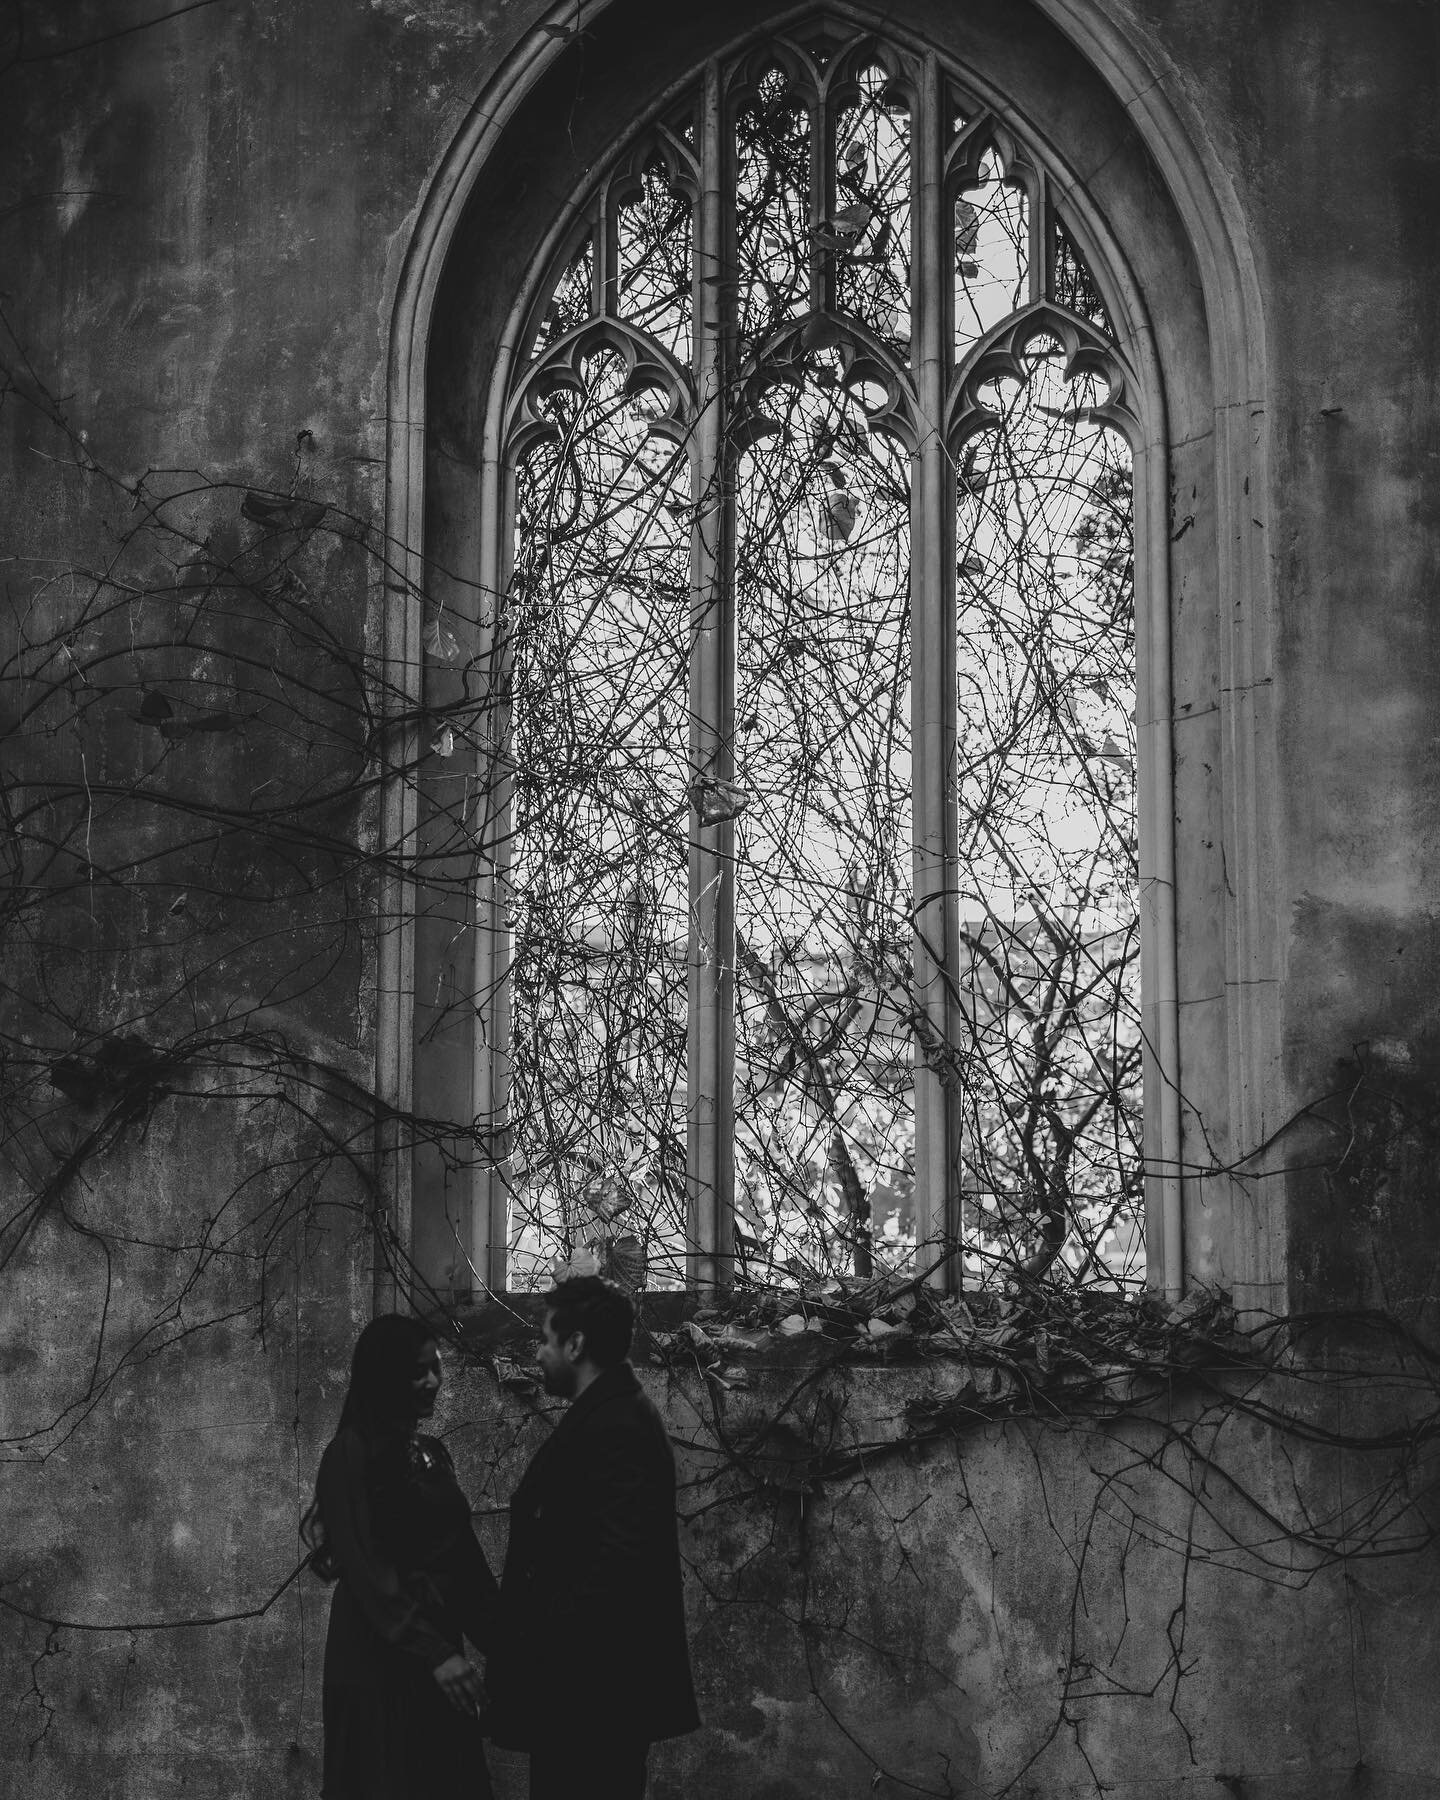 We explored some of the hidden gems London has to offer. 

The Ruined Church - St. Dunstan in the East.

/

#engagementphotos #engagement #engaged  #love #weddingphotographer #emotion #bridetobe #engagementphotography #shesaidyes #engagementsession #